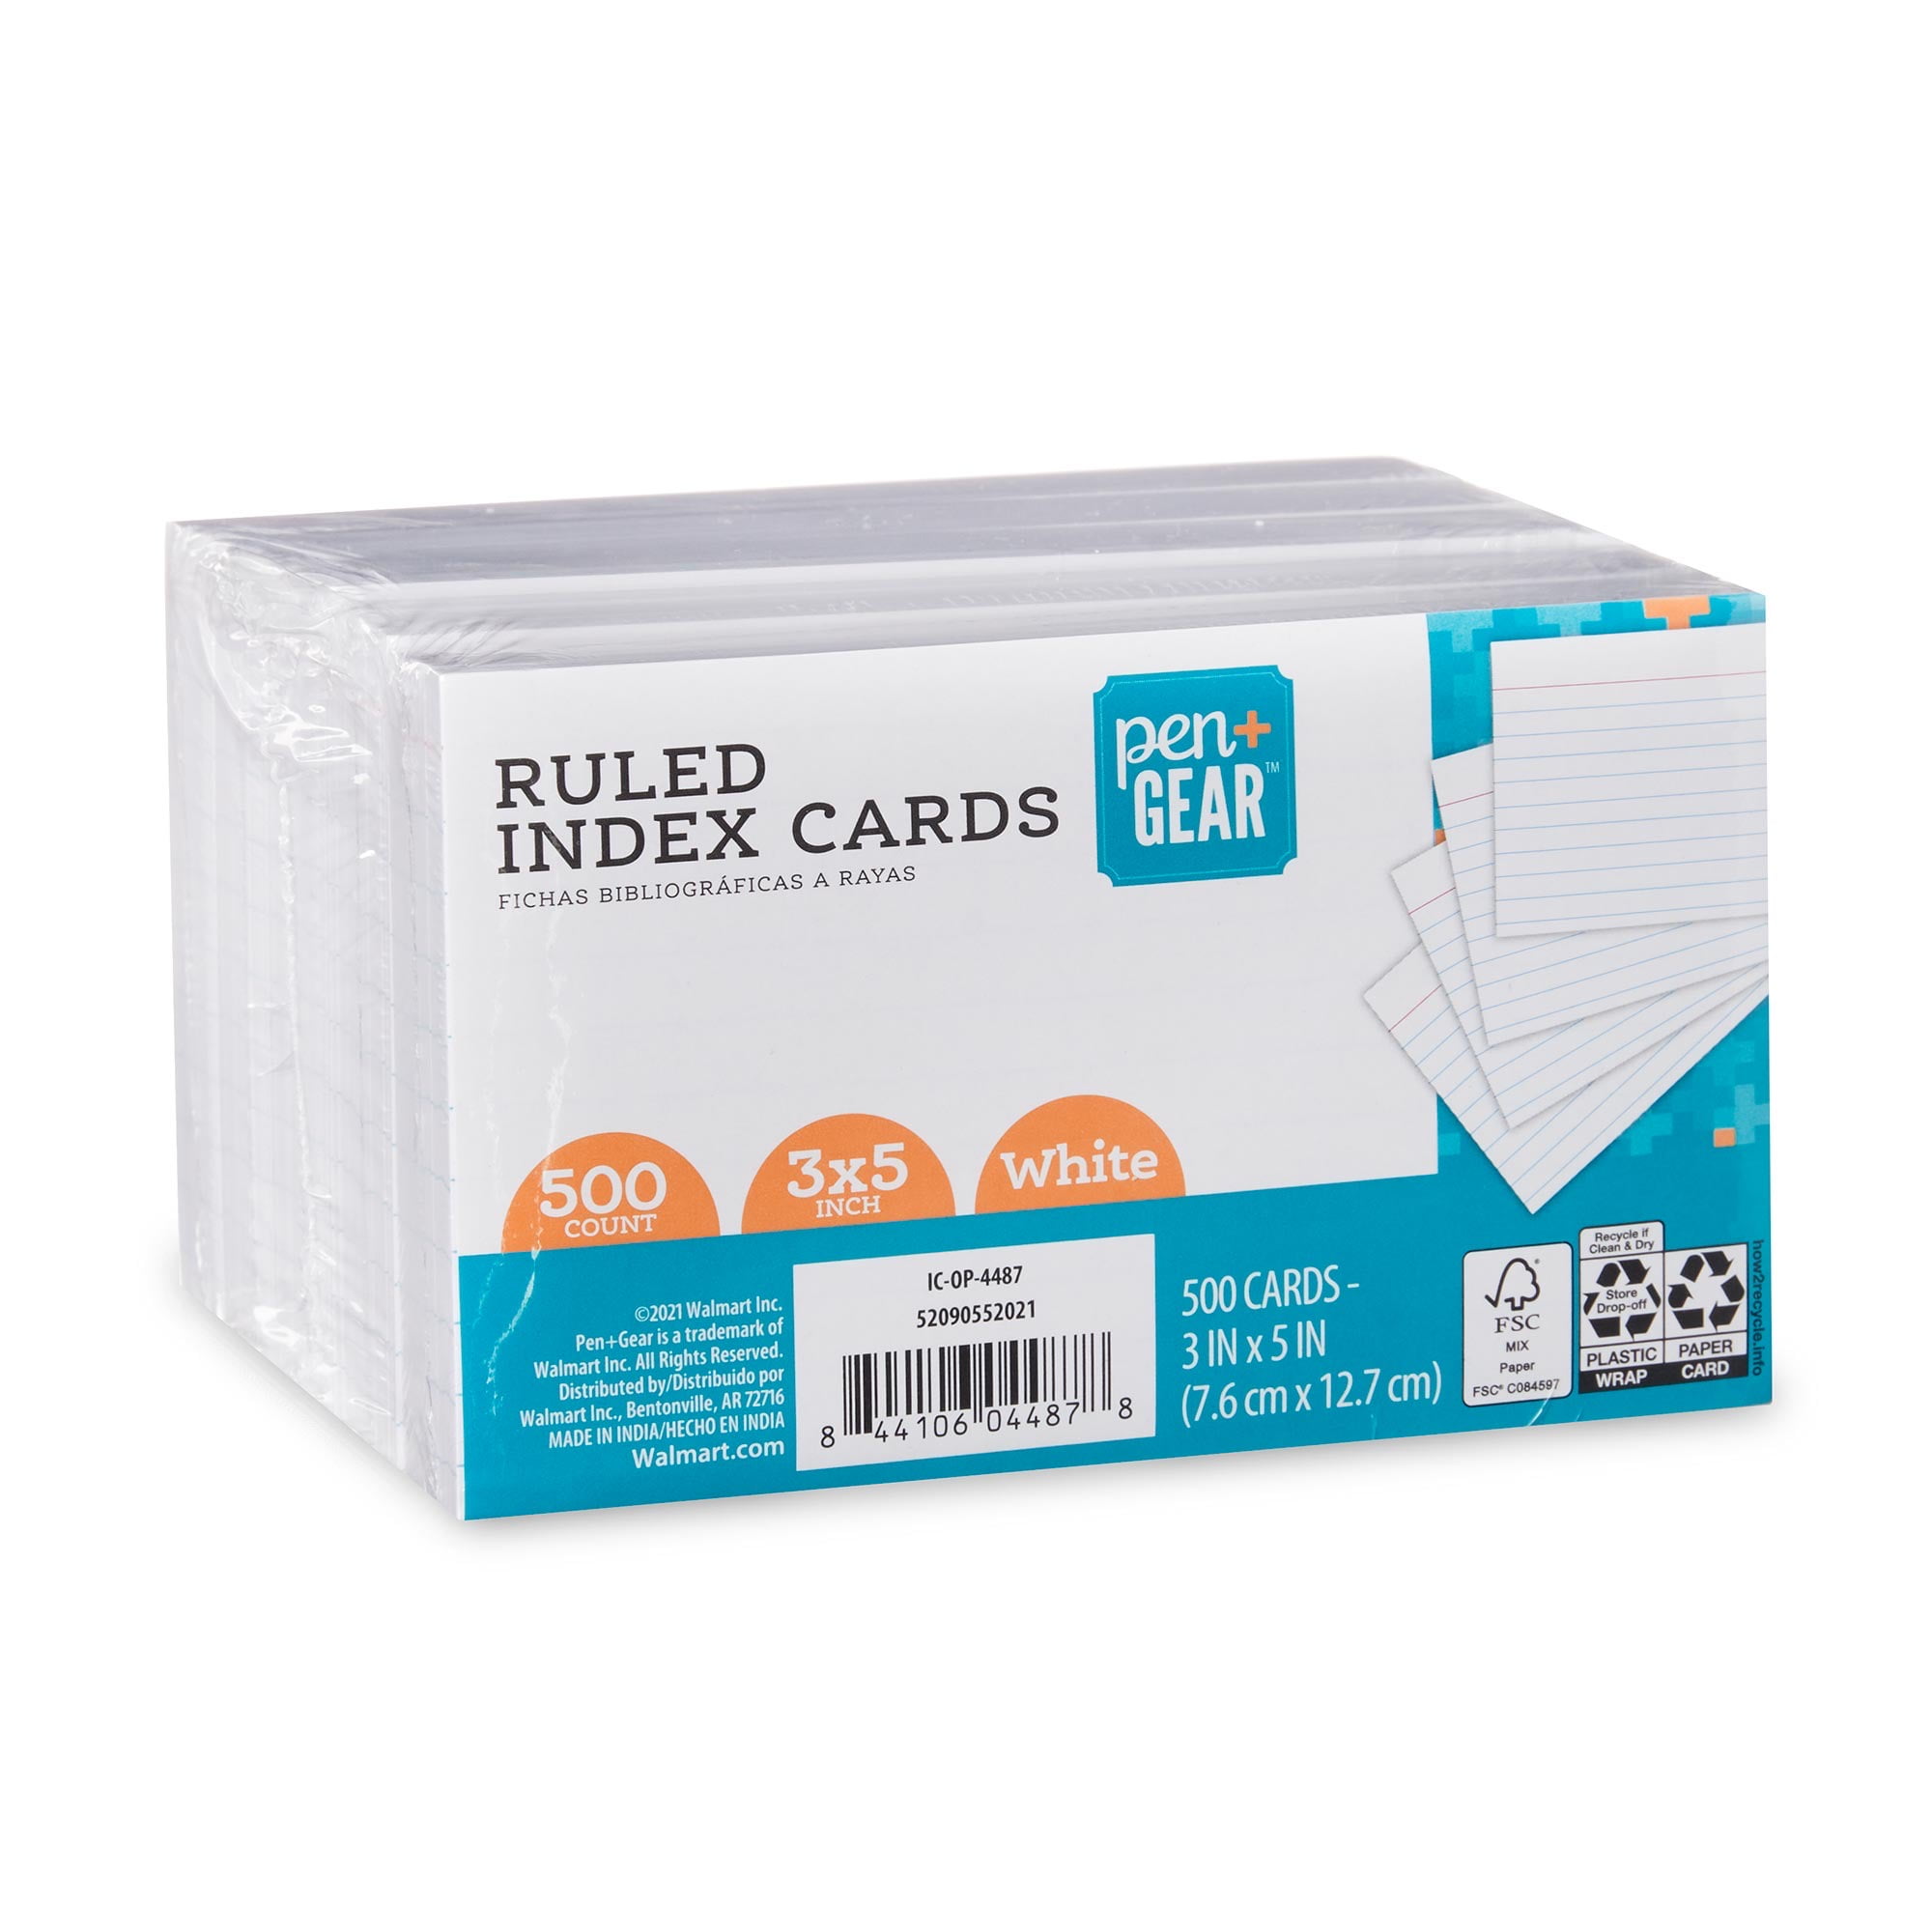 Pen+ Gear Ruled Index Cards, White, 500 Count, 3 x 5